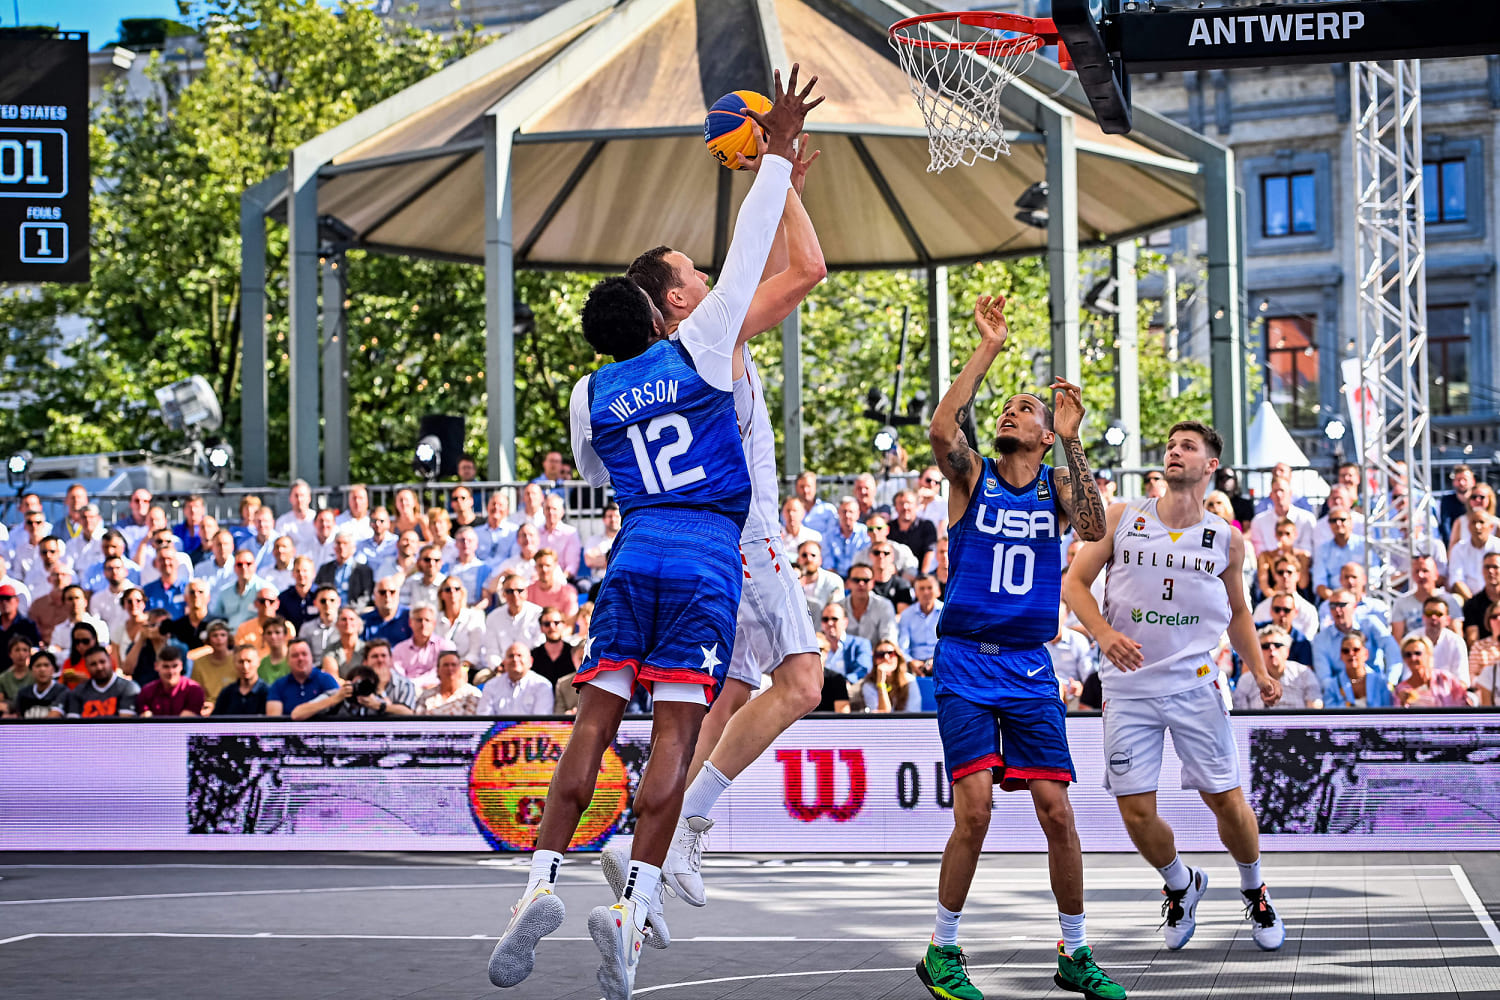 Basketball in 40 mph winds? Inside the wild world of 3x3 hoops